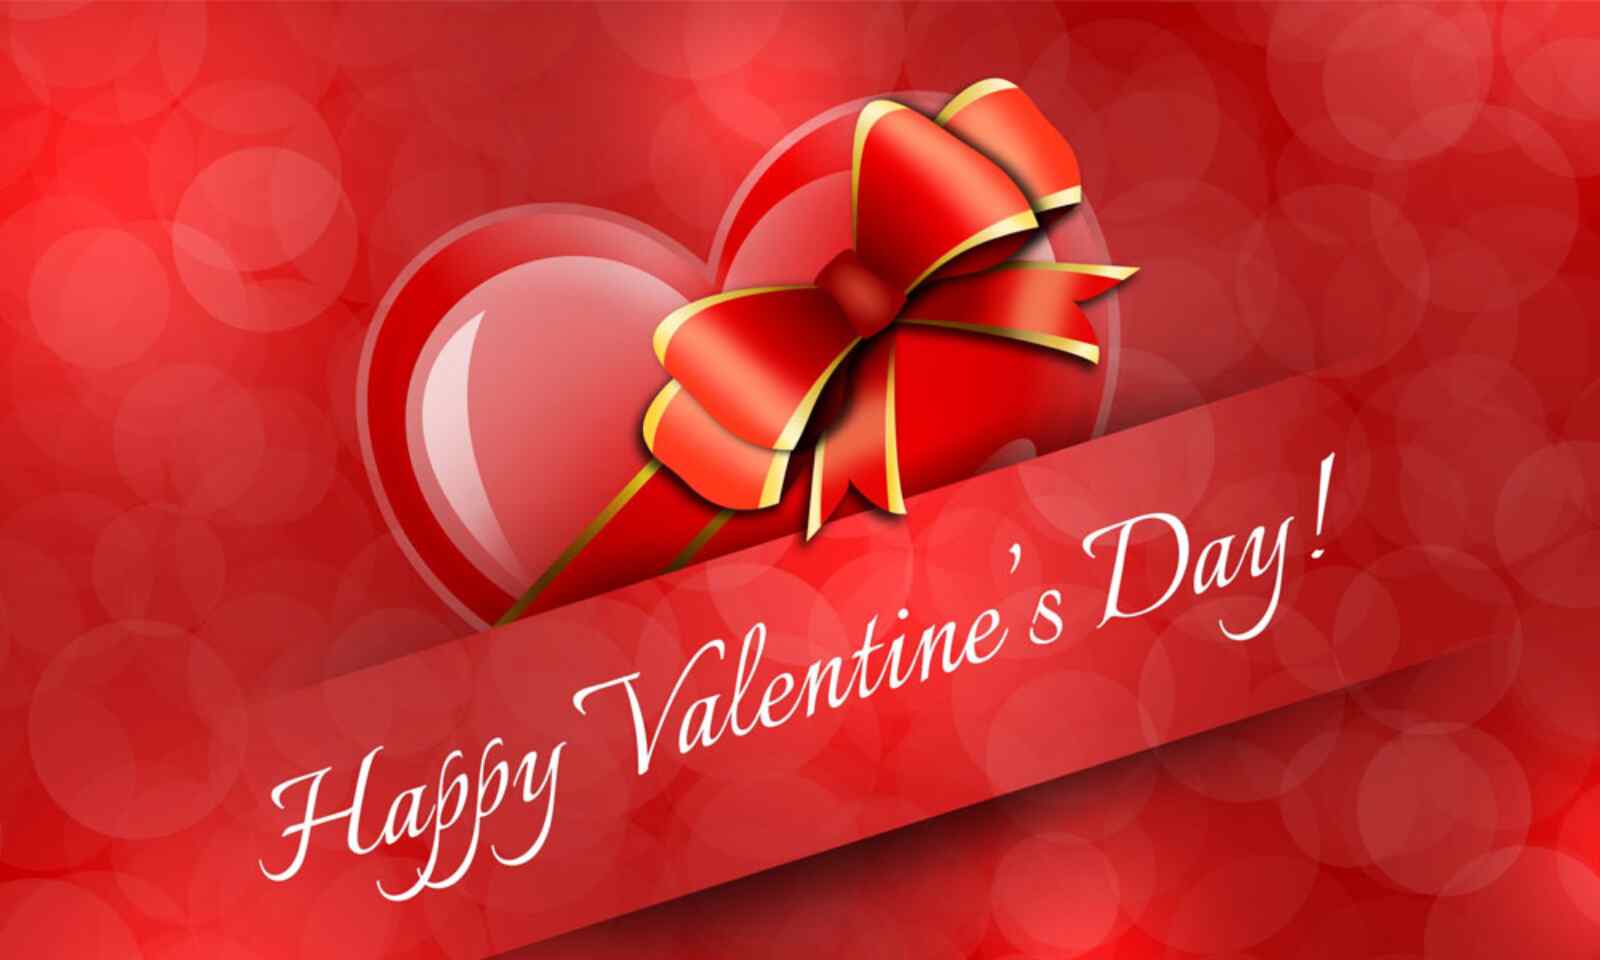 Happy Valentine S Day 2021 Spread Love With These Romantic Wishes And Messages